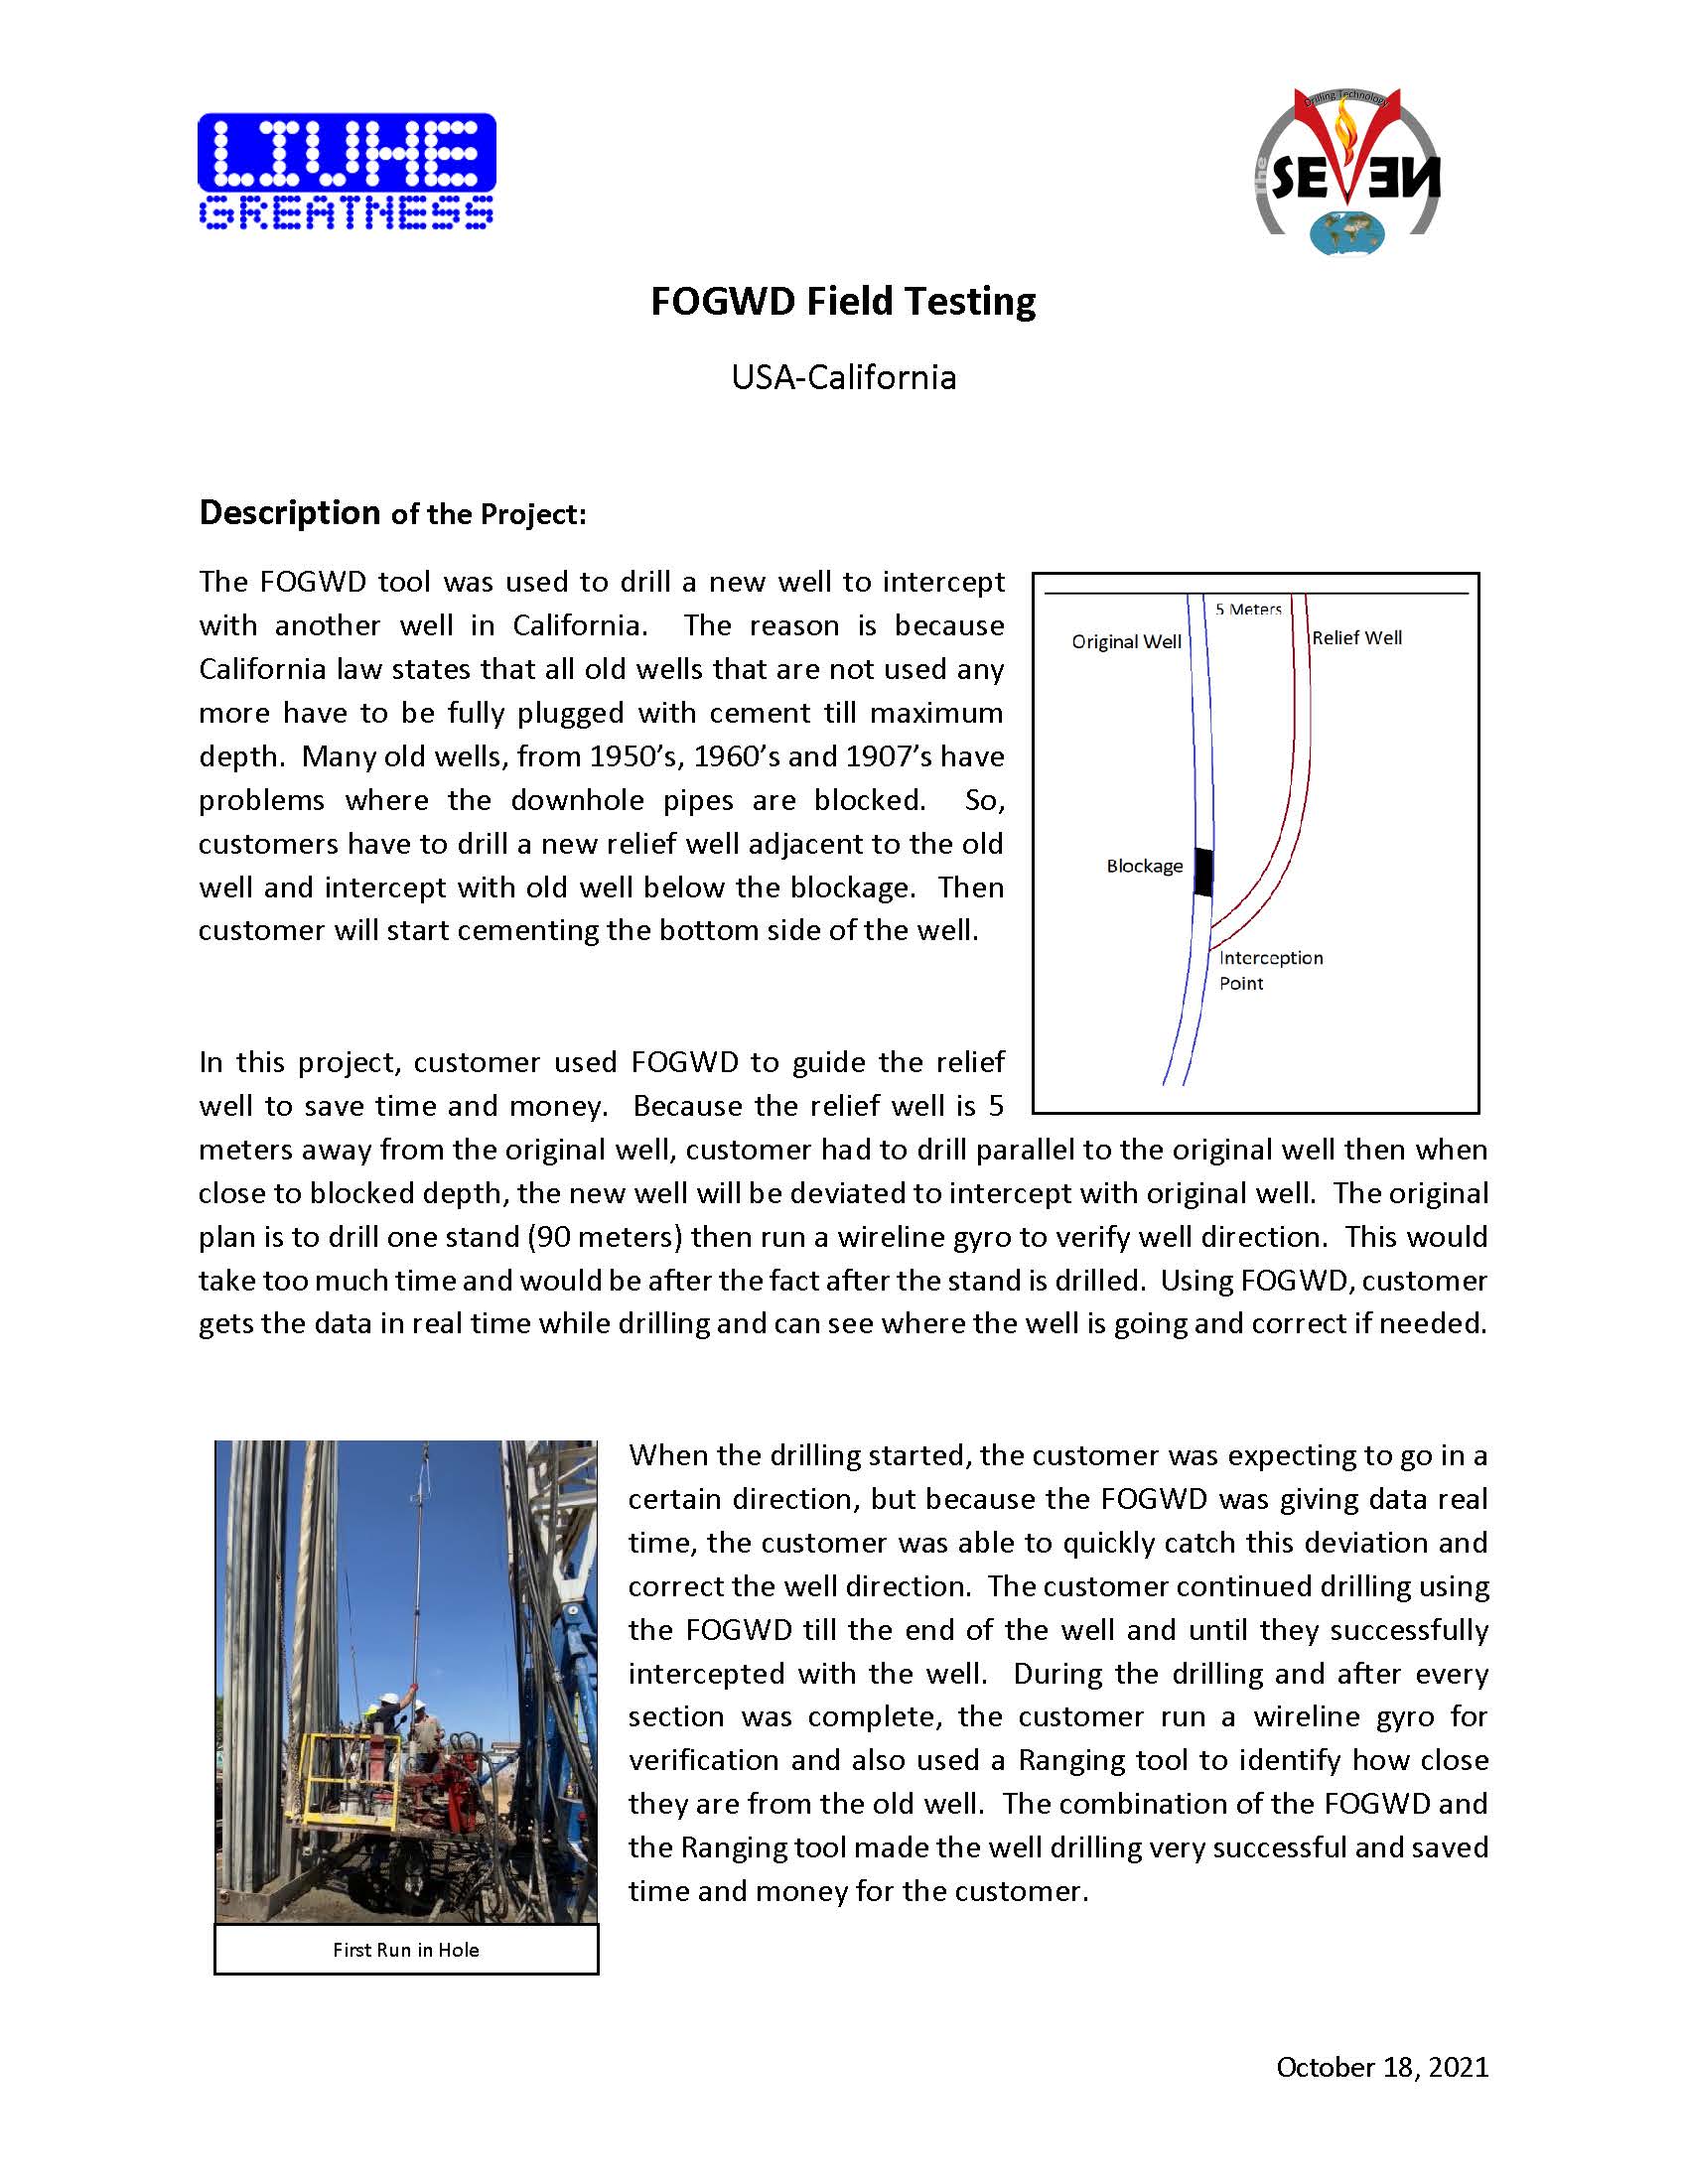 Experience of using gyroscopic inclinometer while drilling